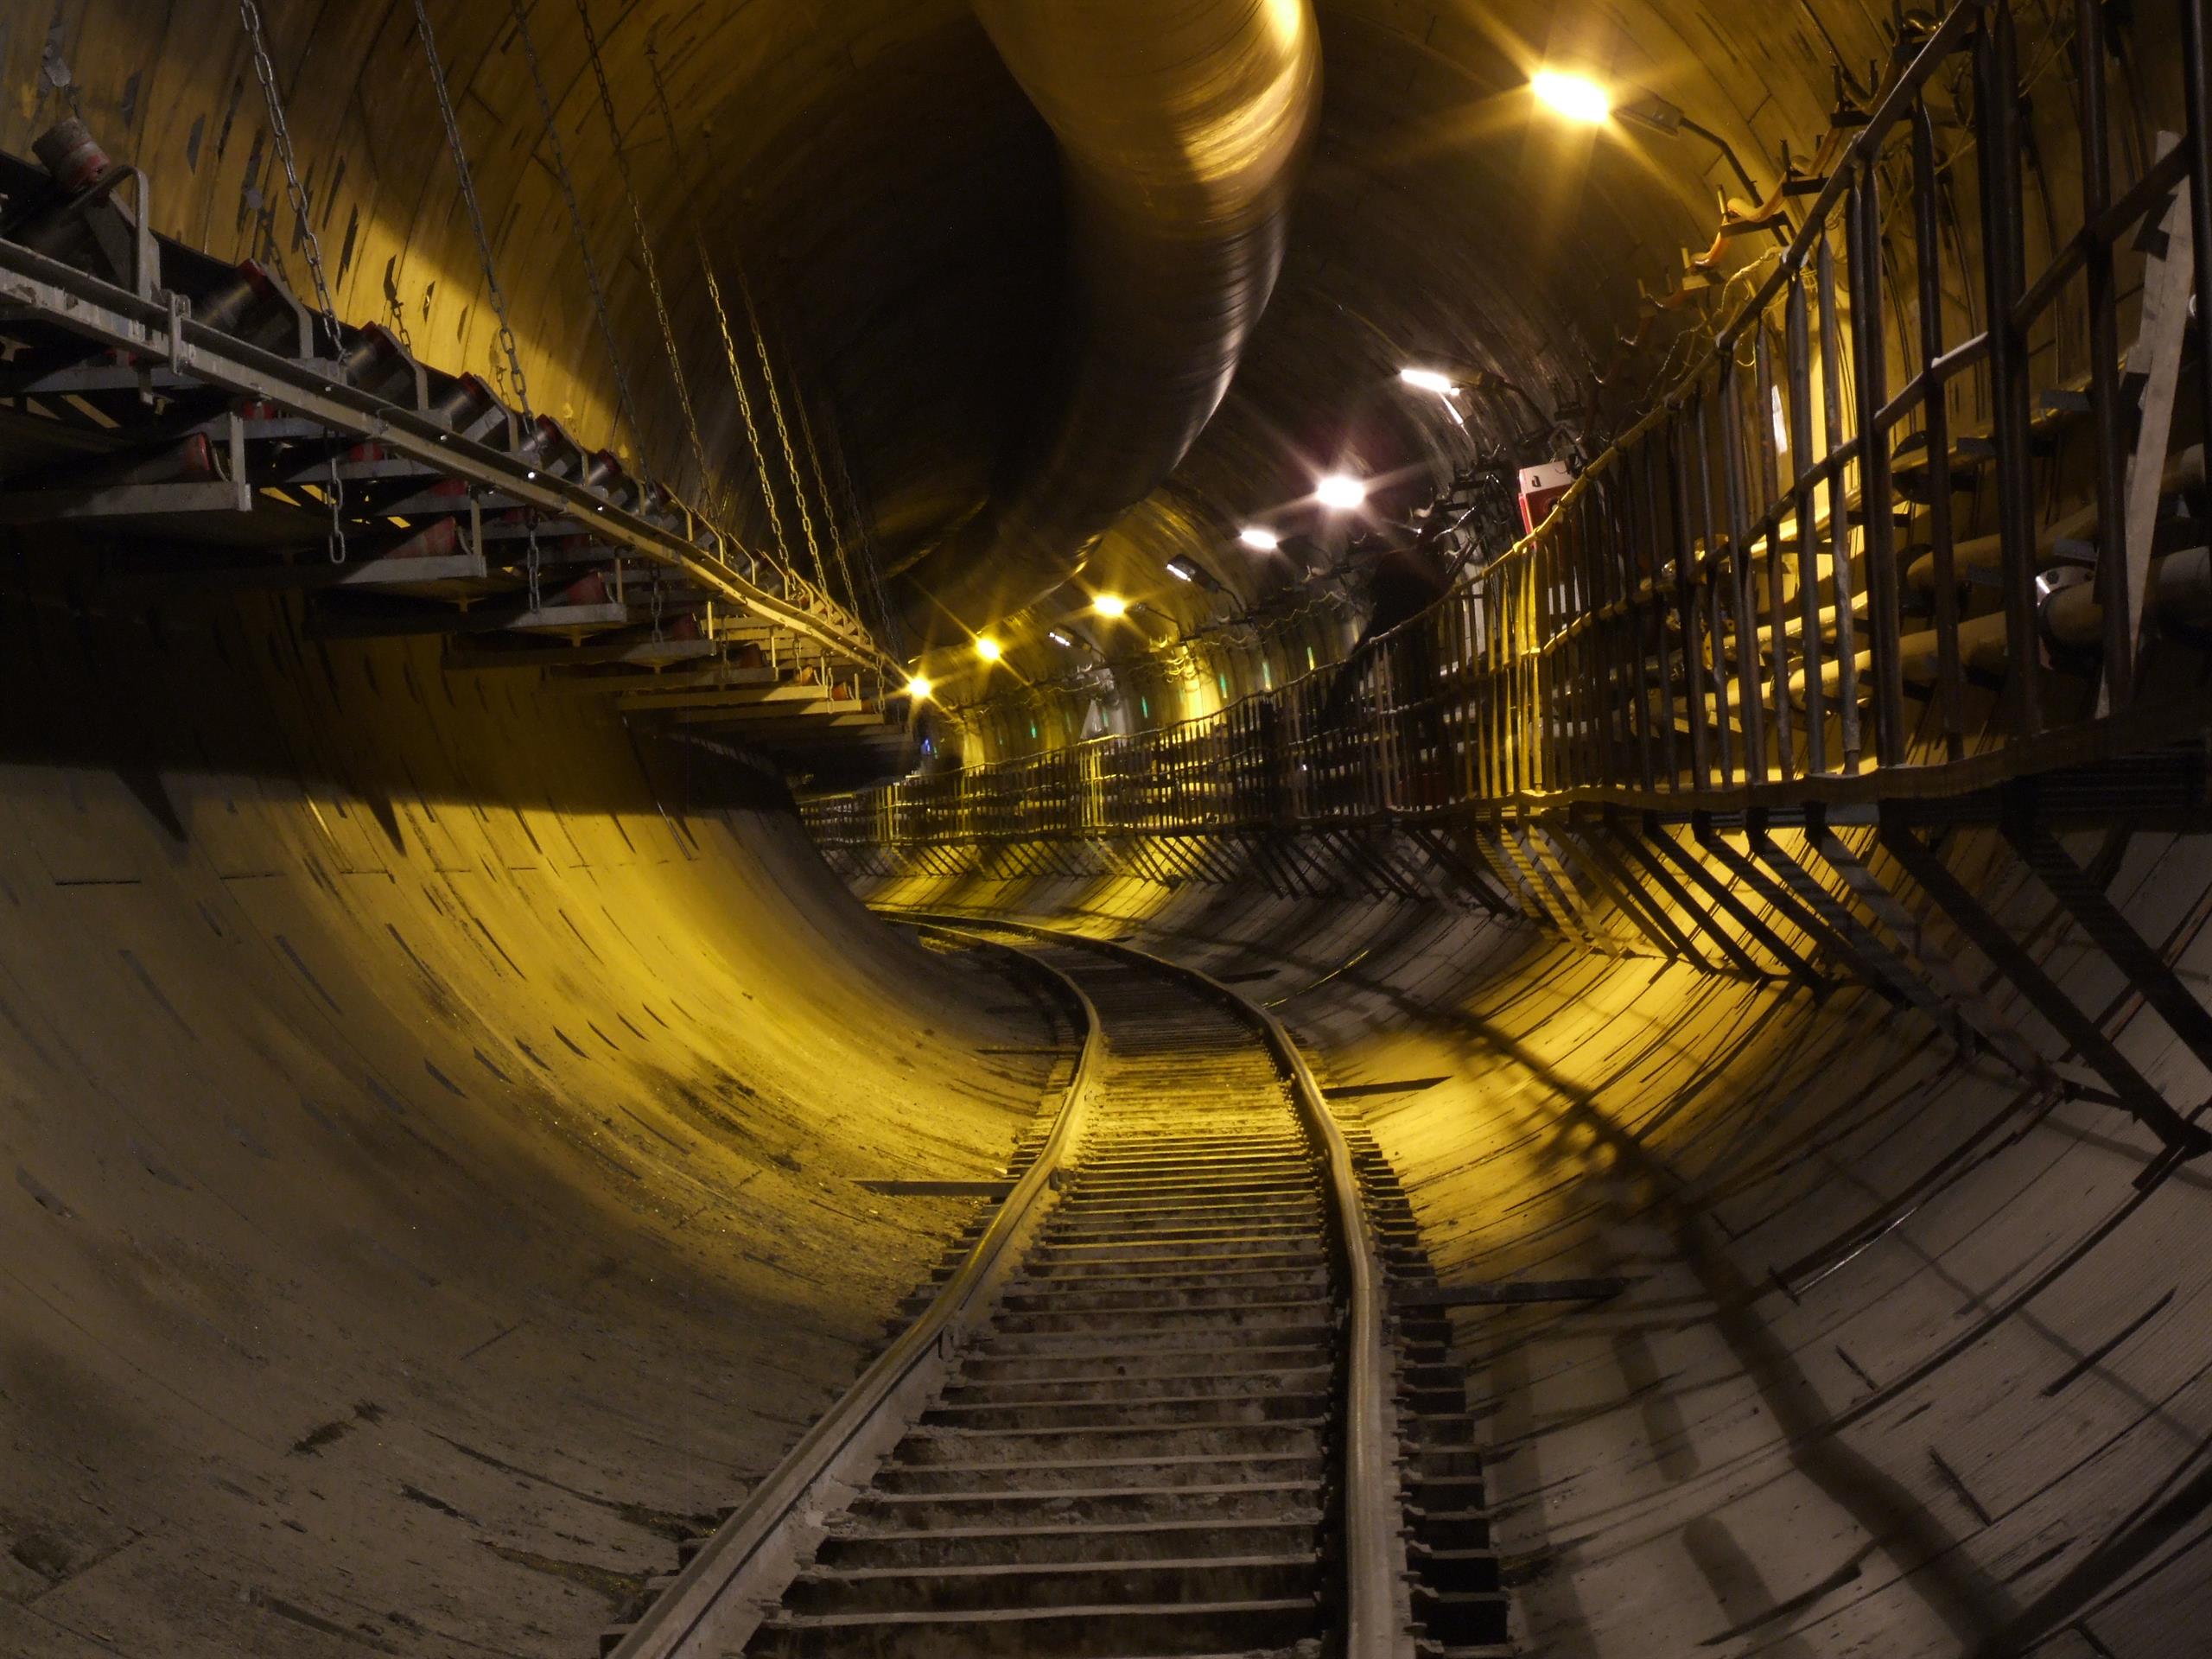 Rail tunnel with track installed